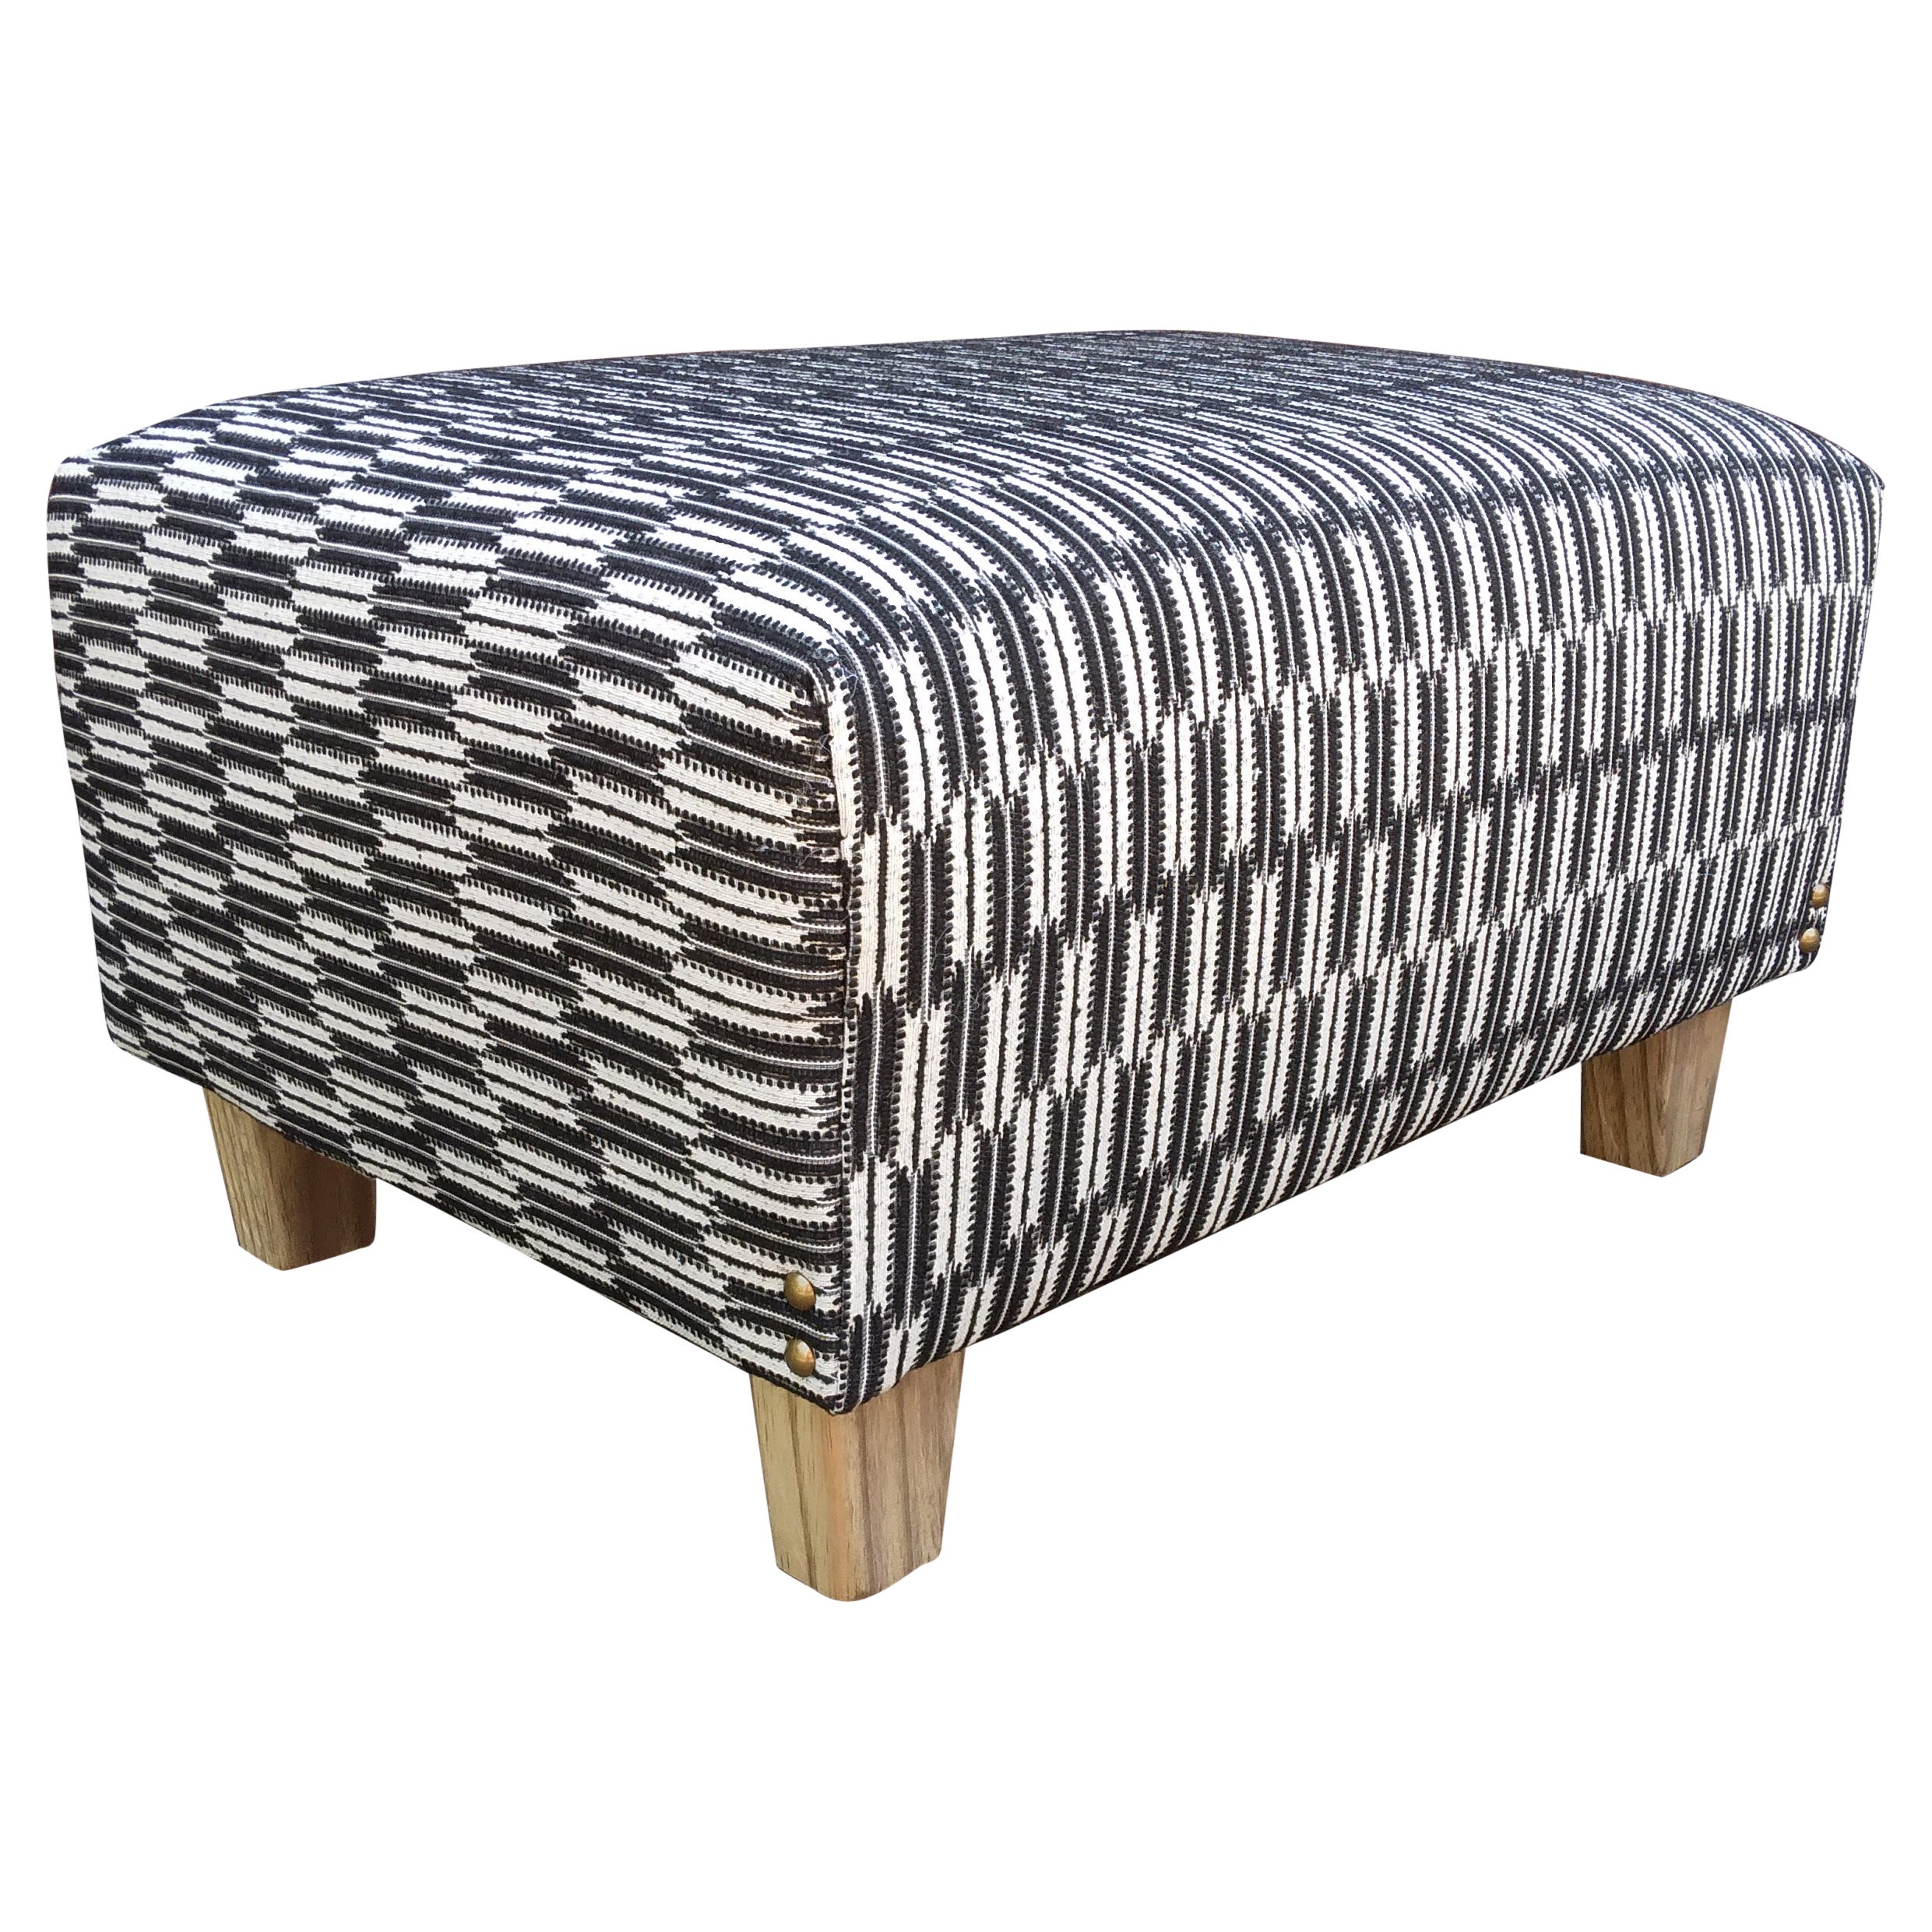 Contemporary Ottoman/Footstool in Black & White Woven Jacquard For Sale